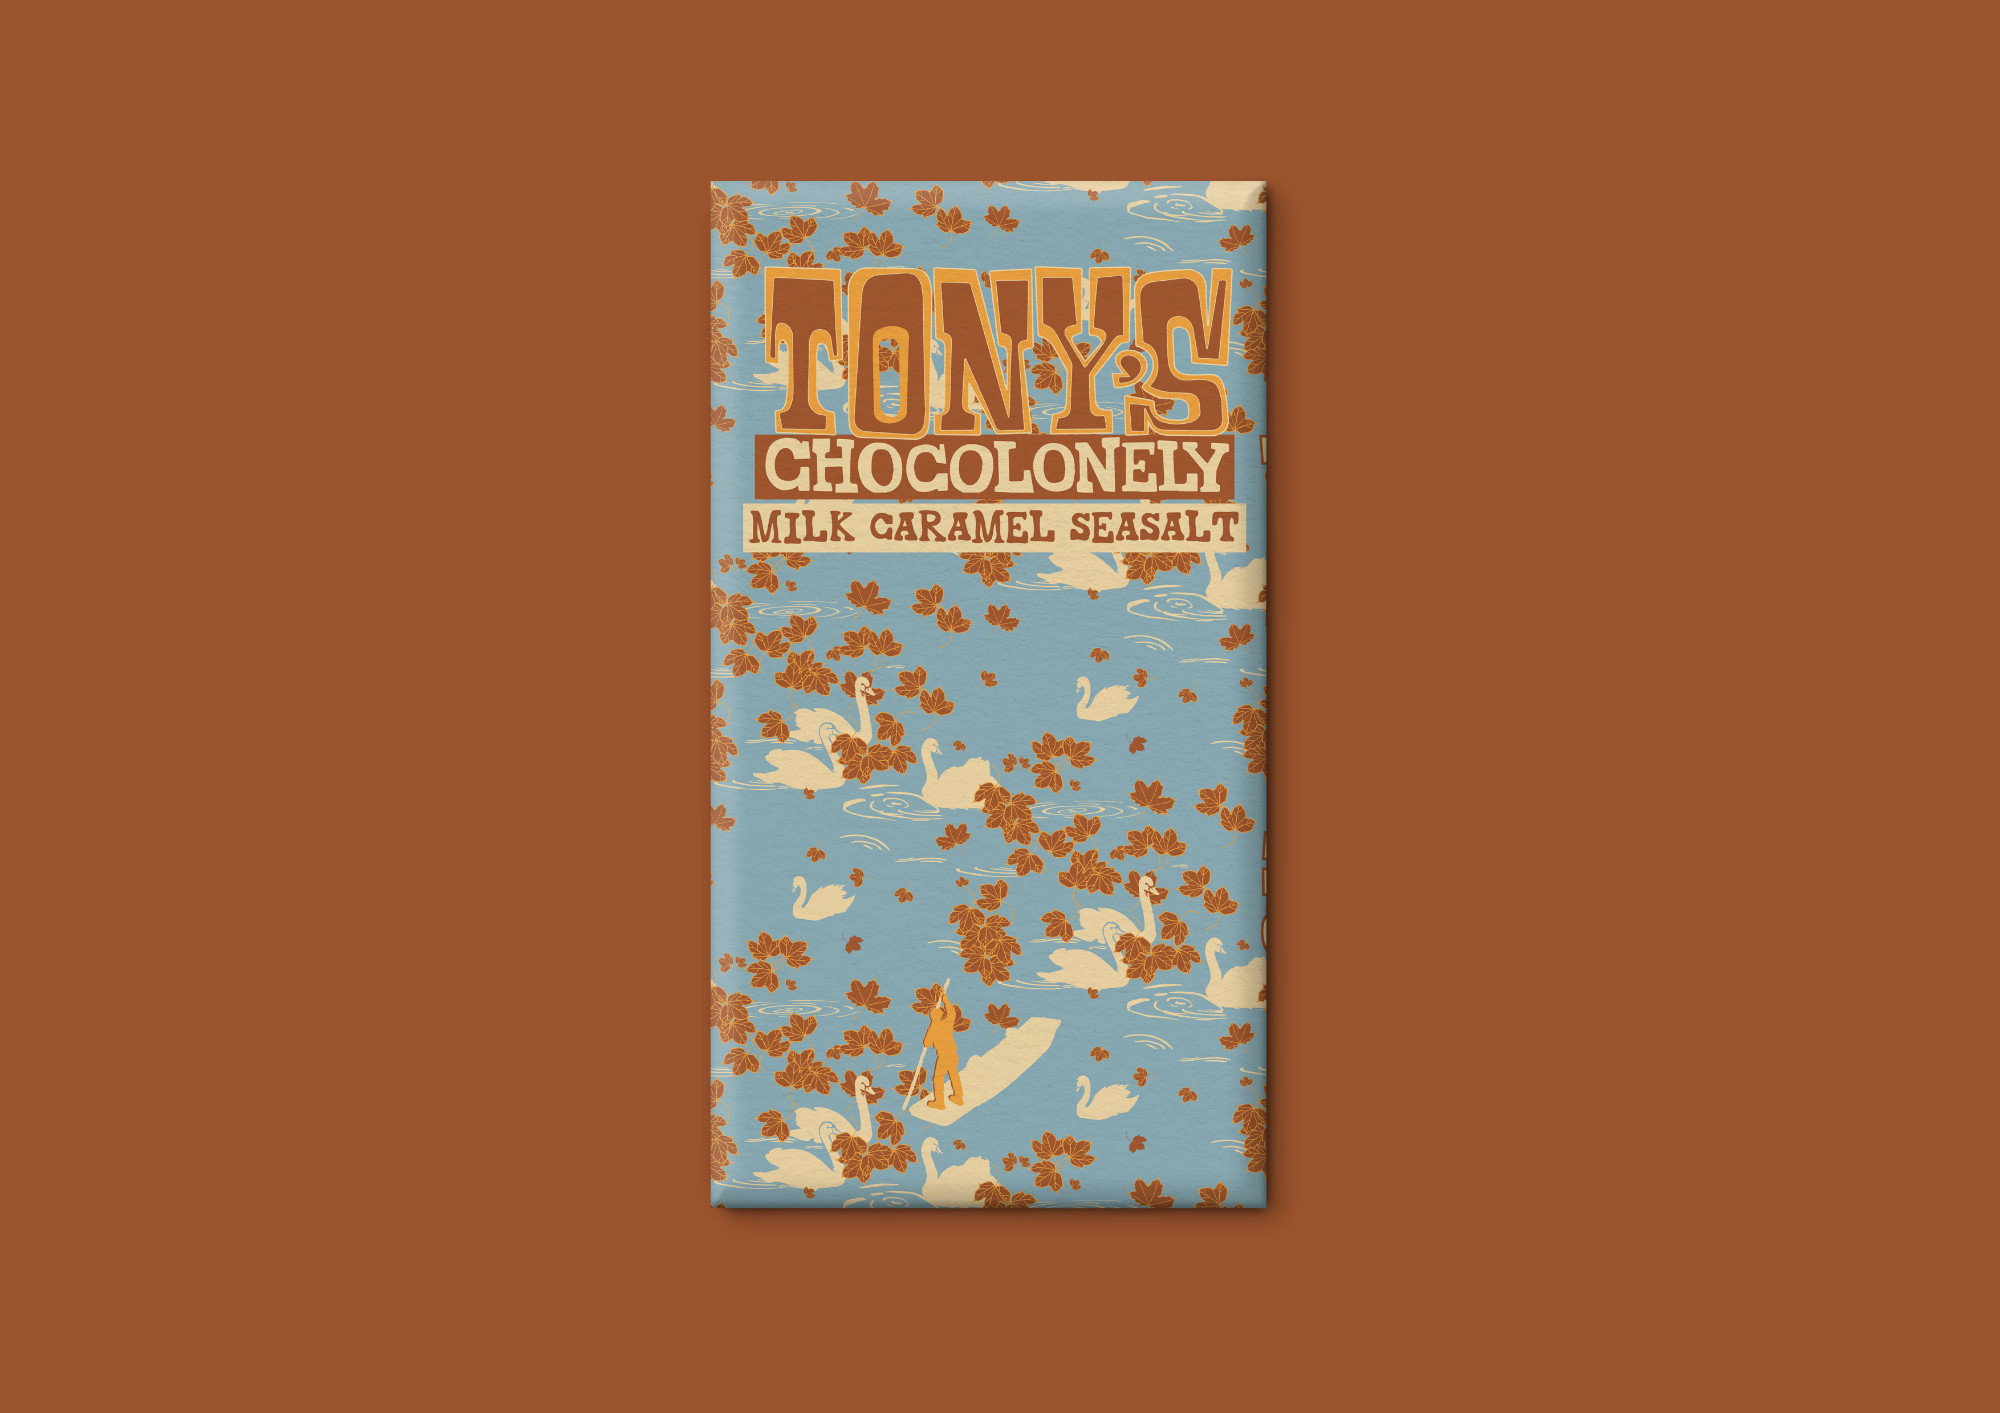 Chocolate wrapper. An example of how a repeat pattern based on Cambridge can be used for chocolate packaging.